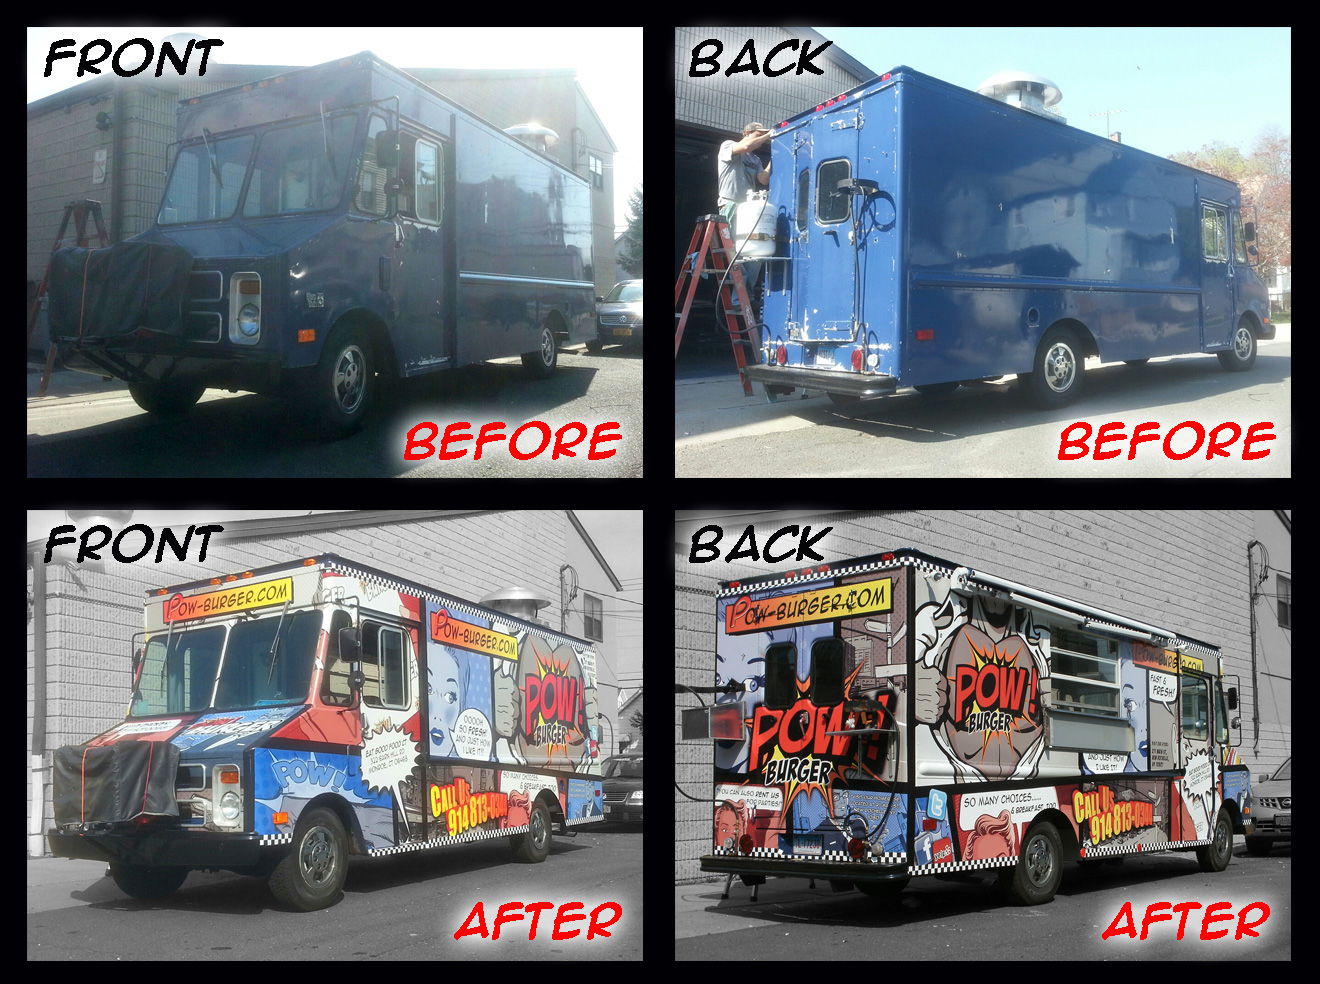 Before and after photos for the Pow Burger Food truck’s vinyl vehicle wrap